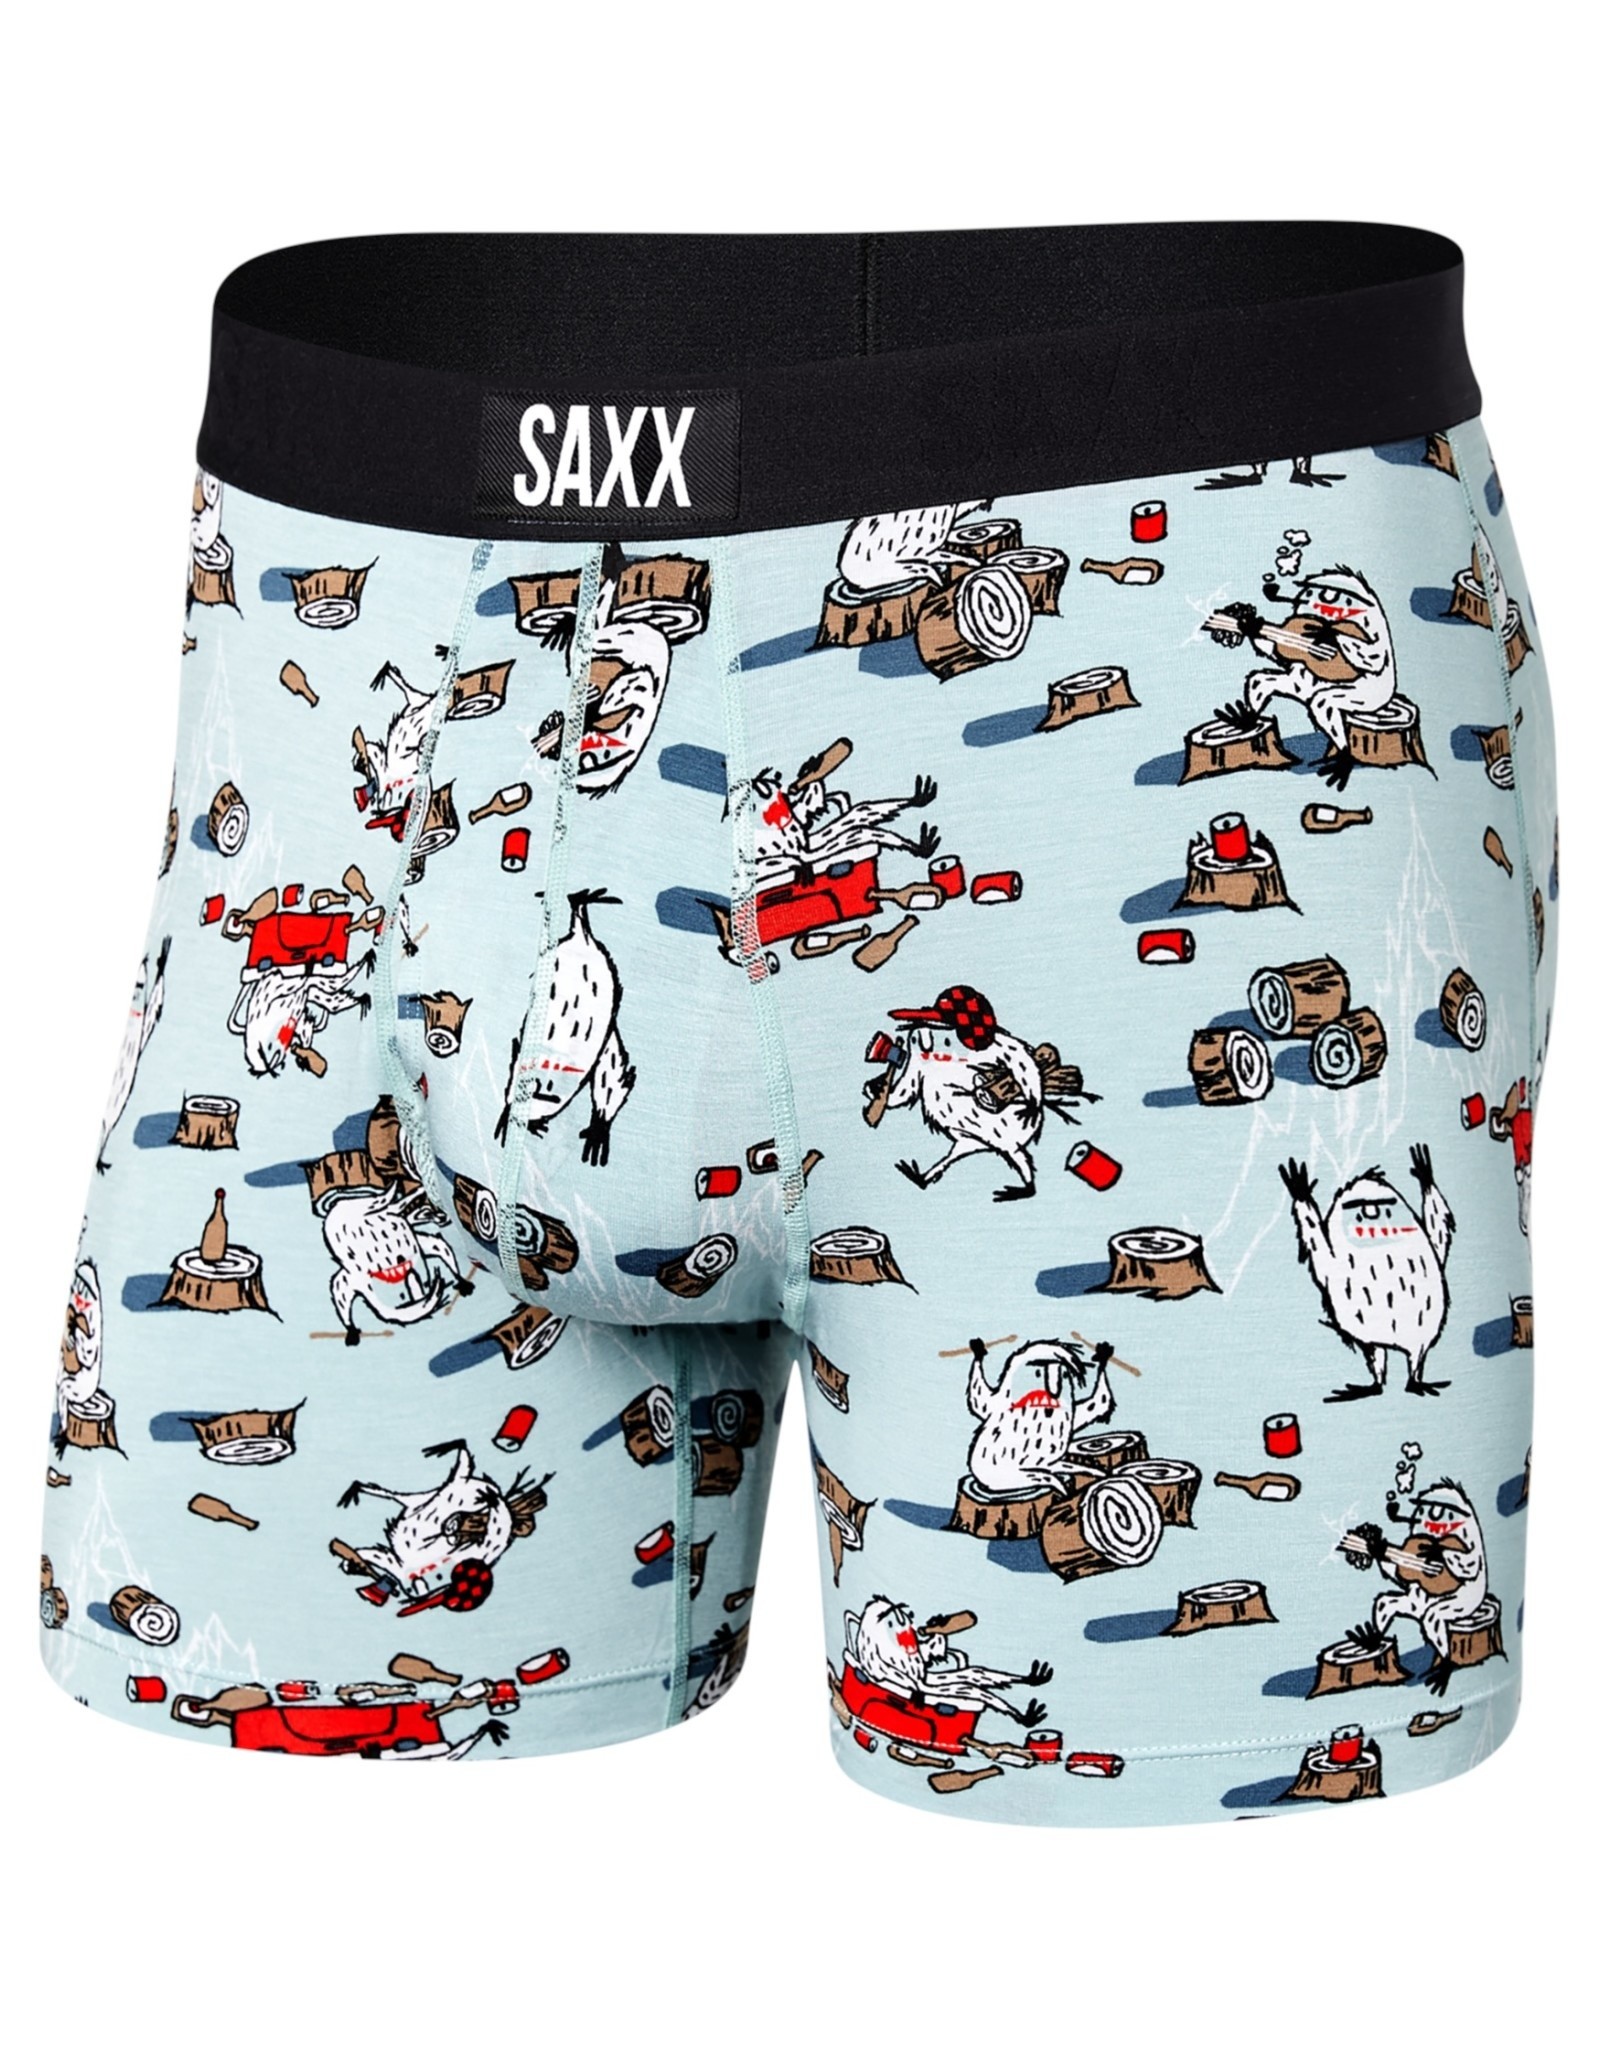 Saxx Ultra Boxer Brief Ombre Rugby SXBB30F-ORT - Bootery Boutique